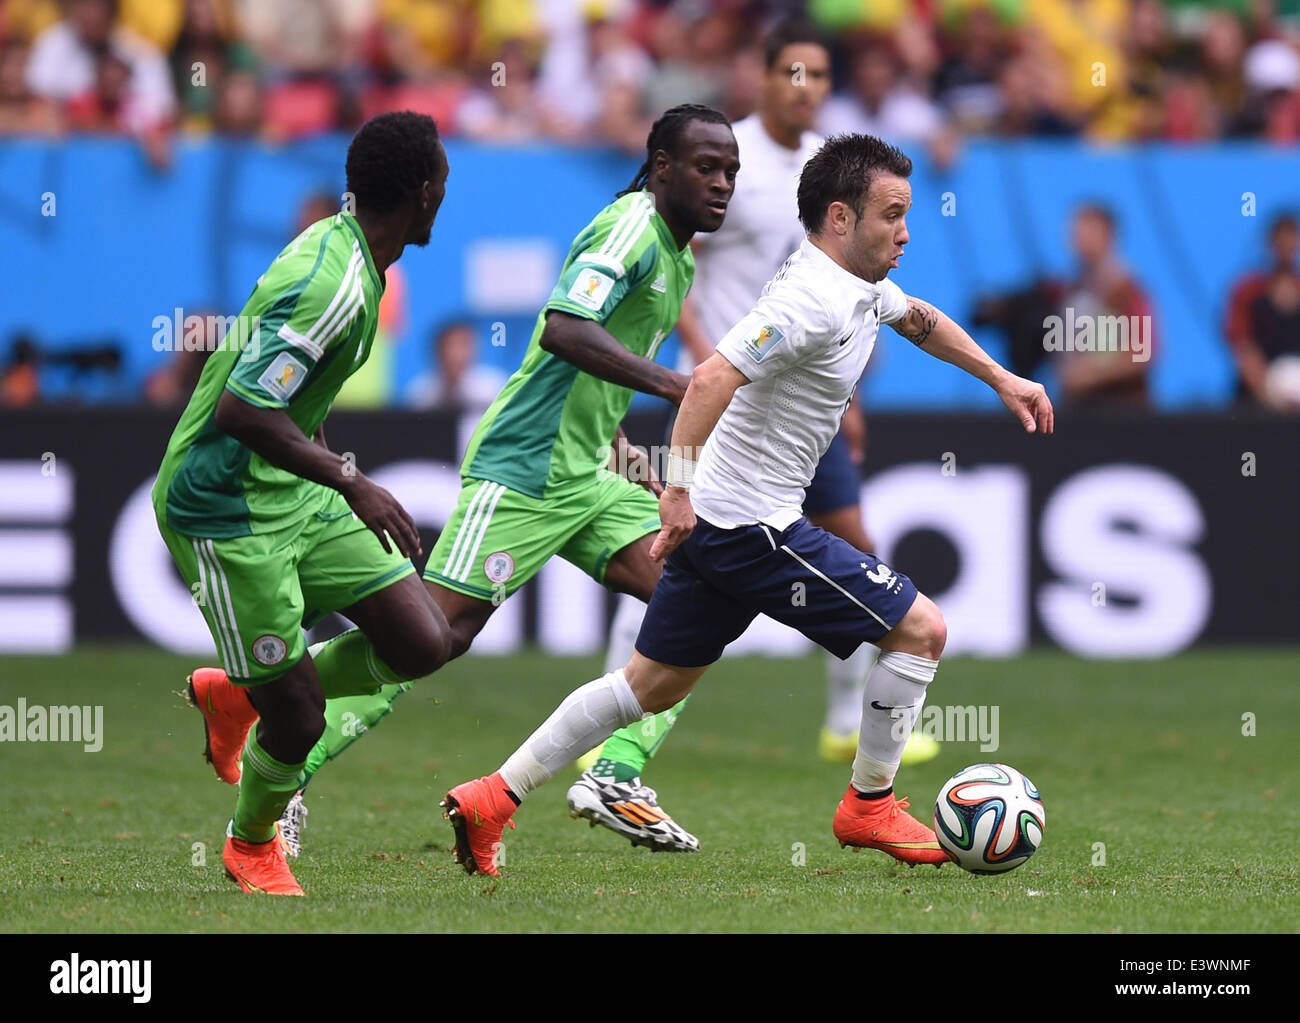 Brasilia, Brazil. 30th June, 2014. Mathieu Valbuena (R) of France in action against Victor Moses (C) of Nigeria during the FIFA World Cup 2014 round of 16 match between France and Nigeria at the Estadio National Stadium in Brasilia, Brazil, on 30 June 2014. Credit:  dpa picture alliance/Alamy Live News Stock Photo